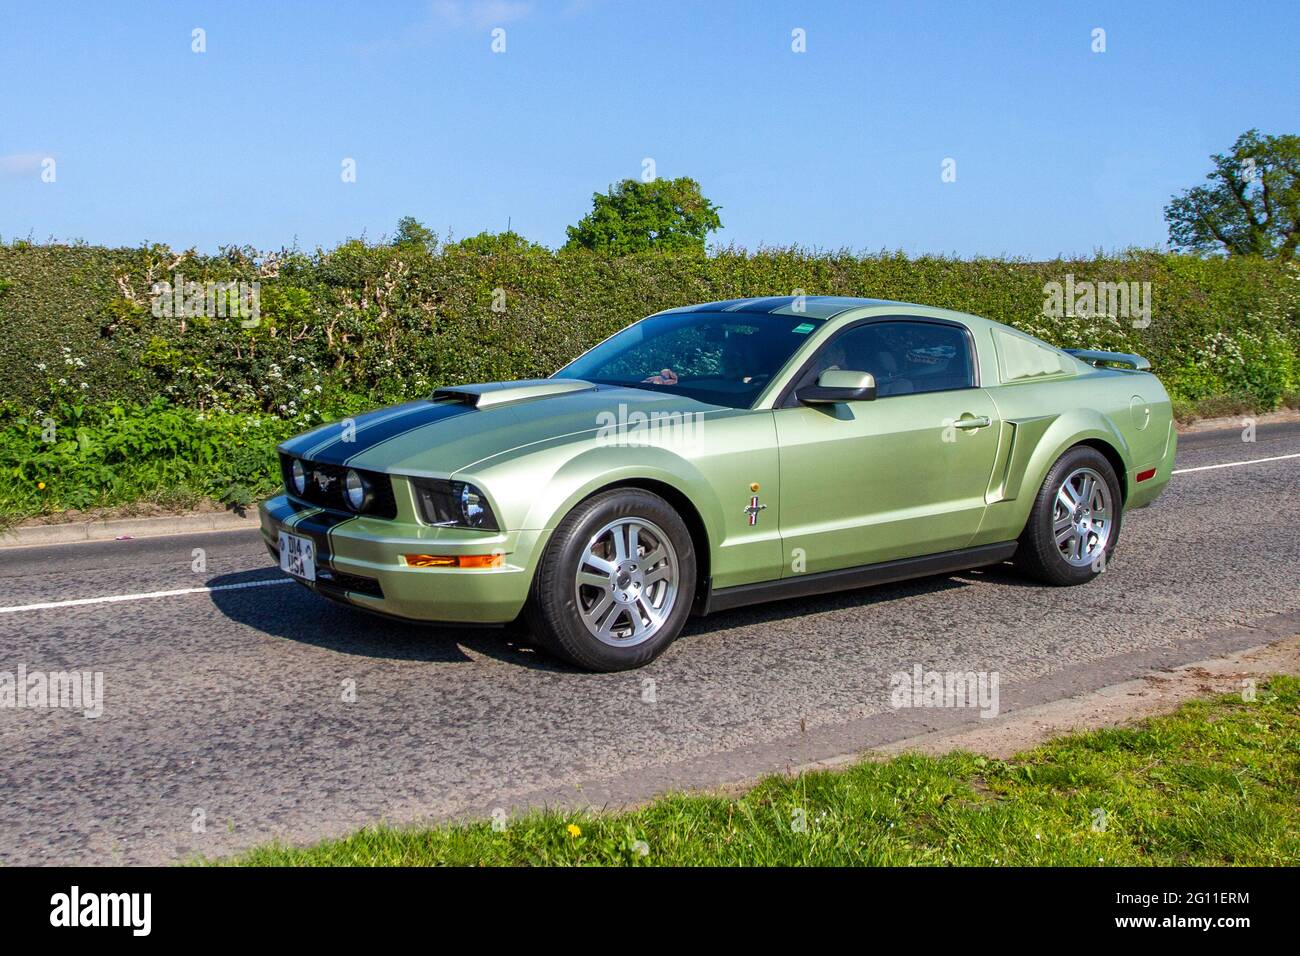 2005 Green American Ford Mustang 3225cc voitures de sport, supercars, voitures de sport, roadsters, super voiture de sport, Voitures de performance, hypercars en route vers Capesthorne Hall Classic May car show, Cheshire, Royaume-Uni Banque D'Images